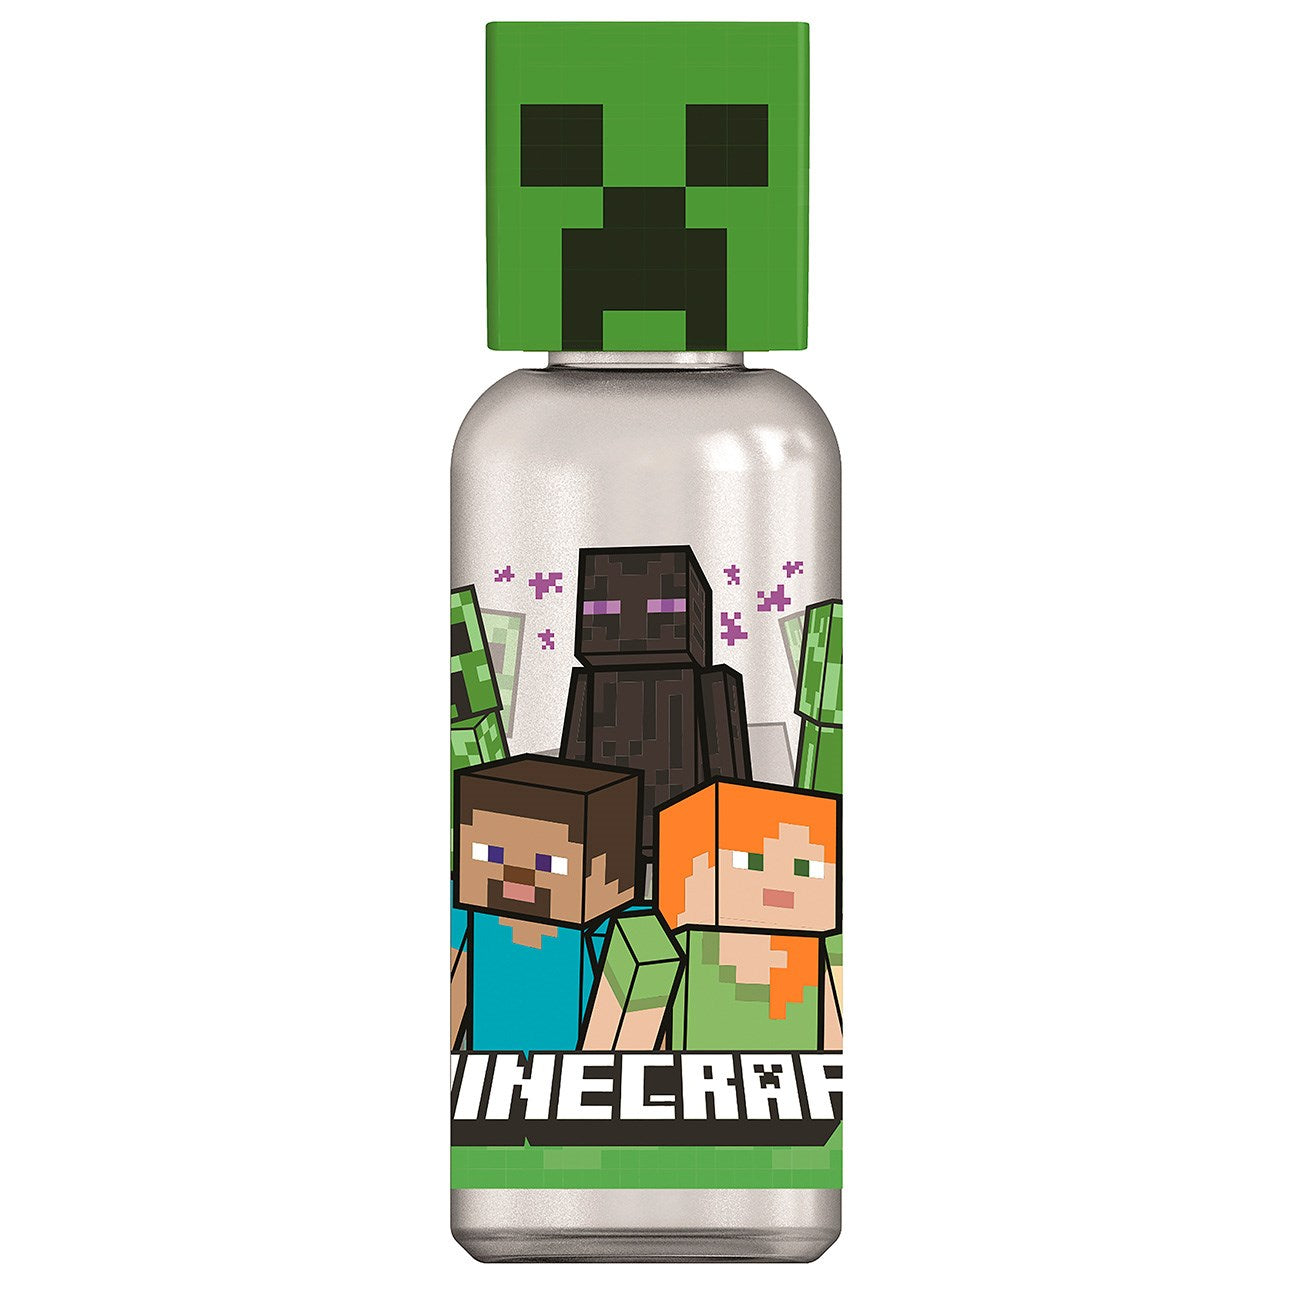 Euromic Minecraft Water Bottle with 3D Figure Top